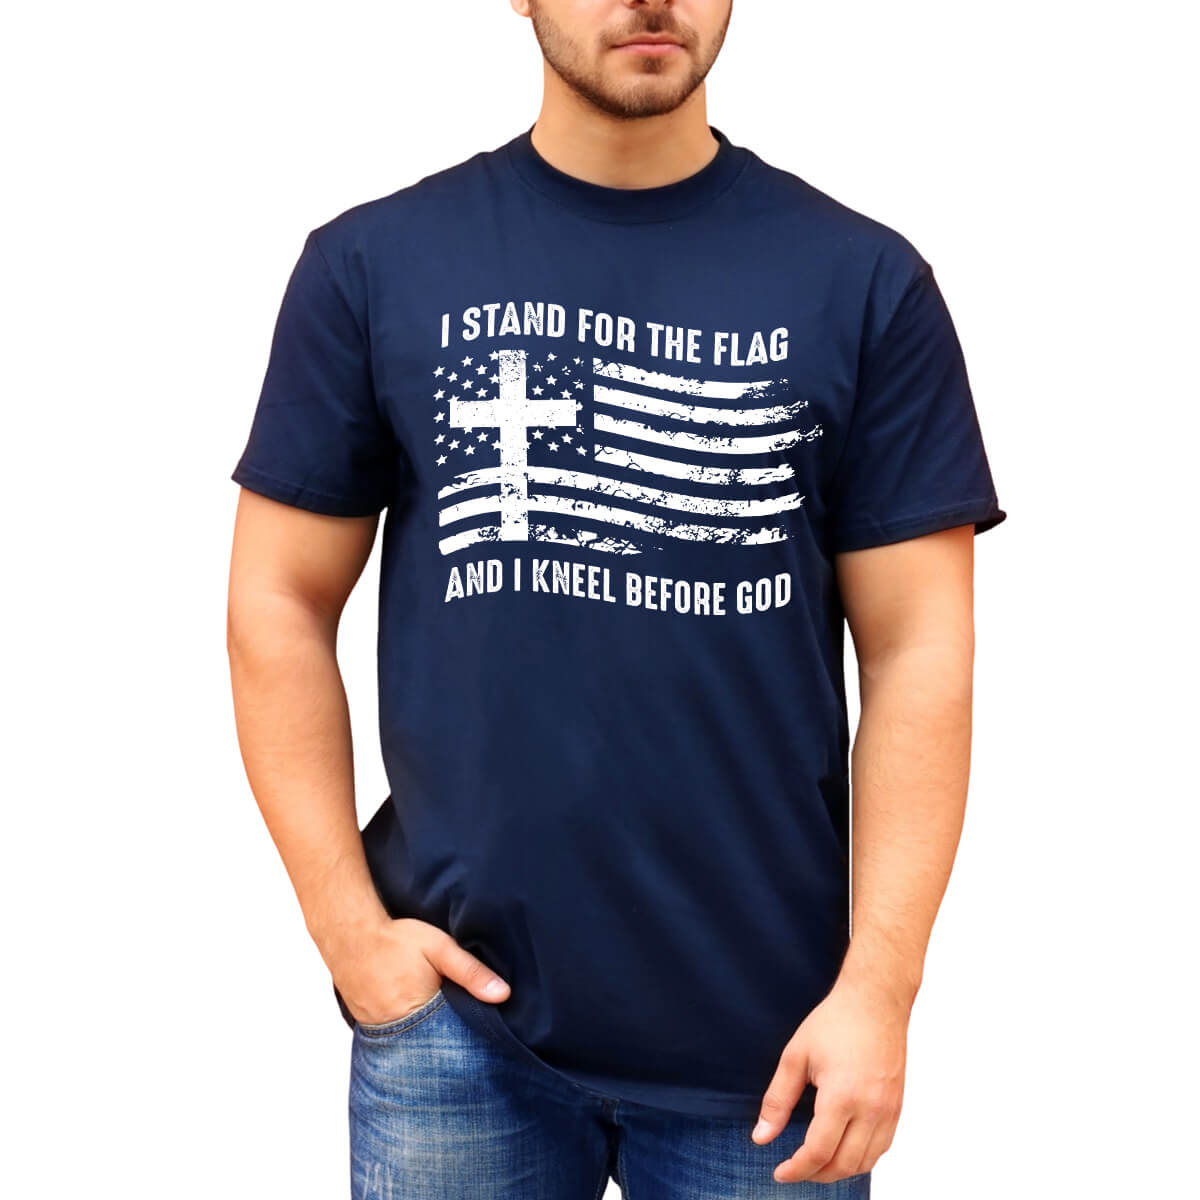 I Stand For The Flag And I Kneel Before God Men's T-Shirt